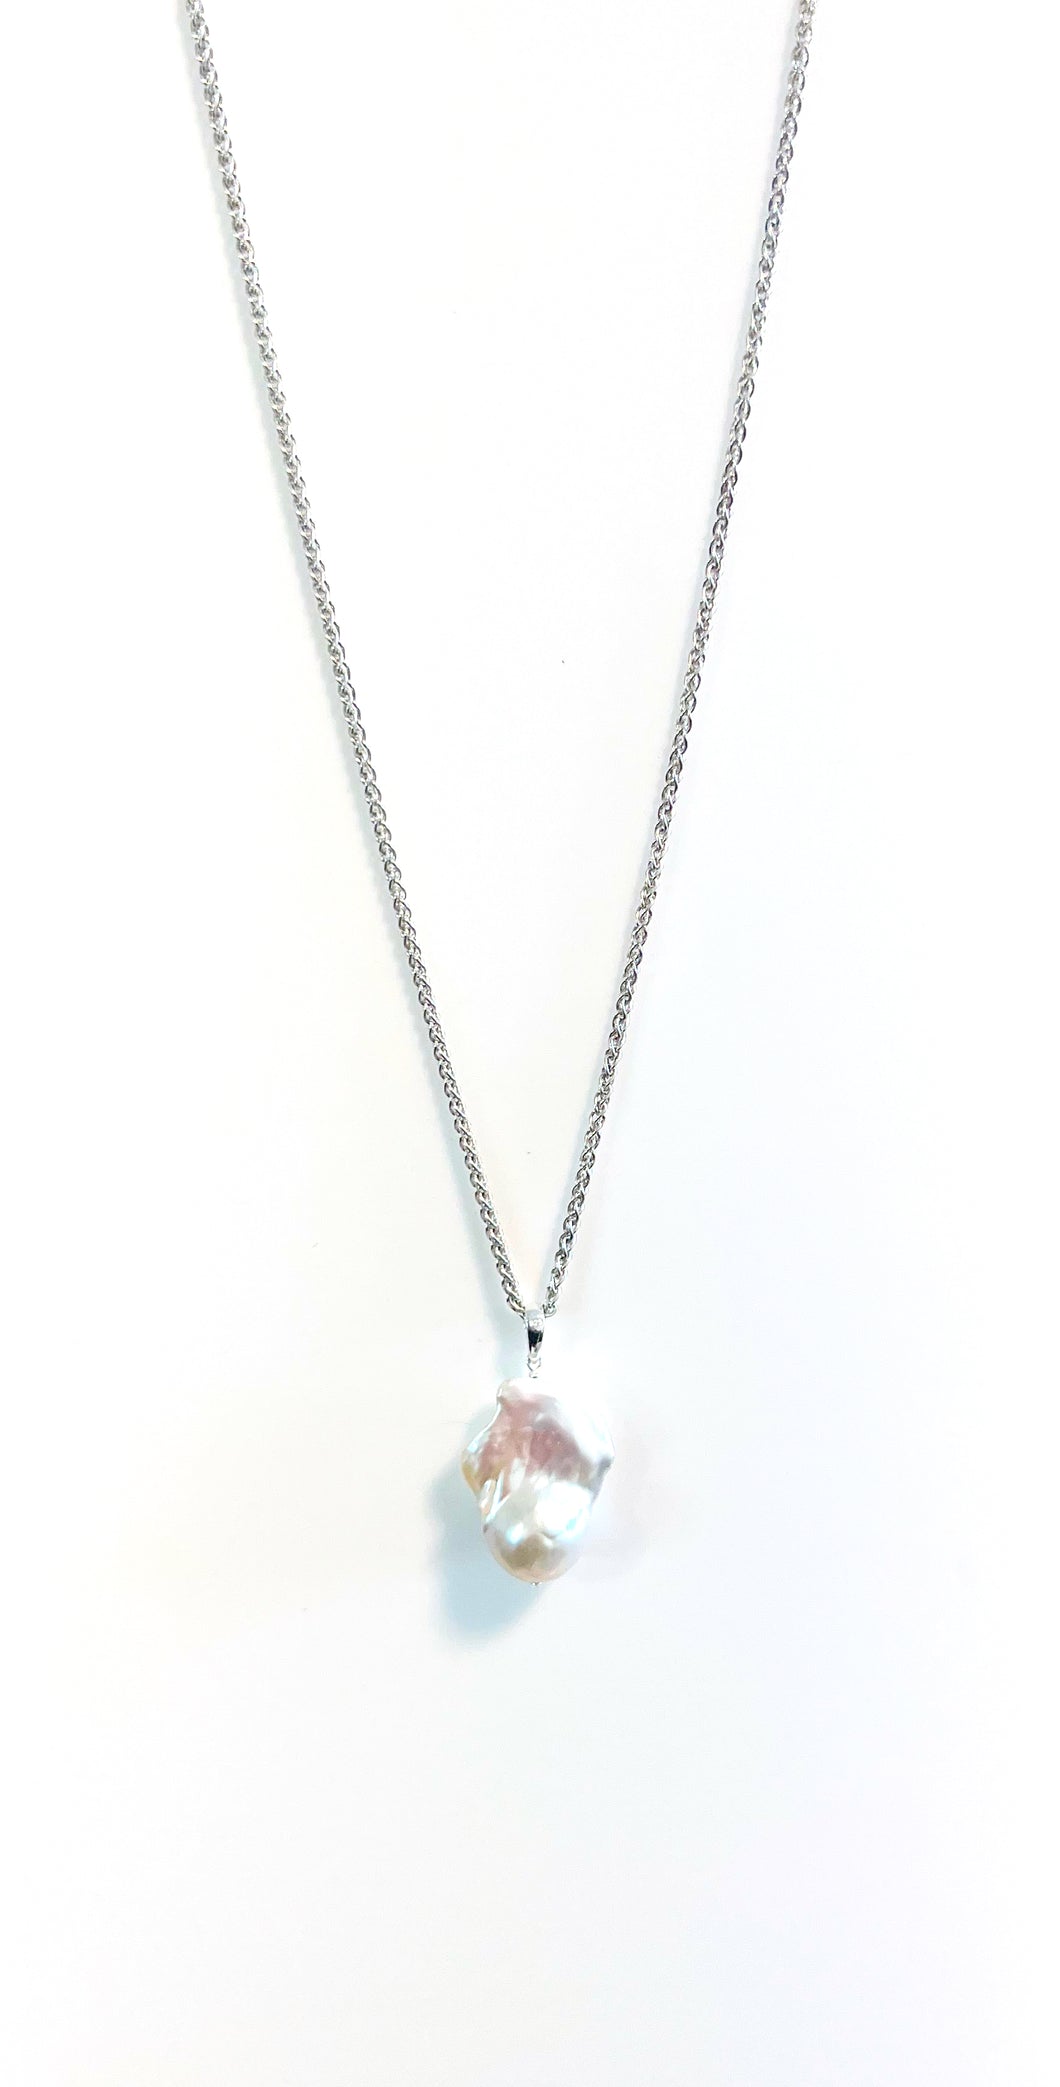 Australian Handmade White Baroque Pearl Necklace on a Sterling Silver Chain